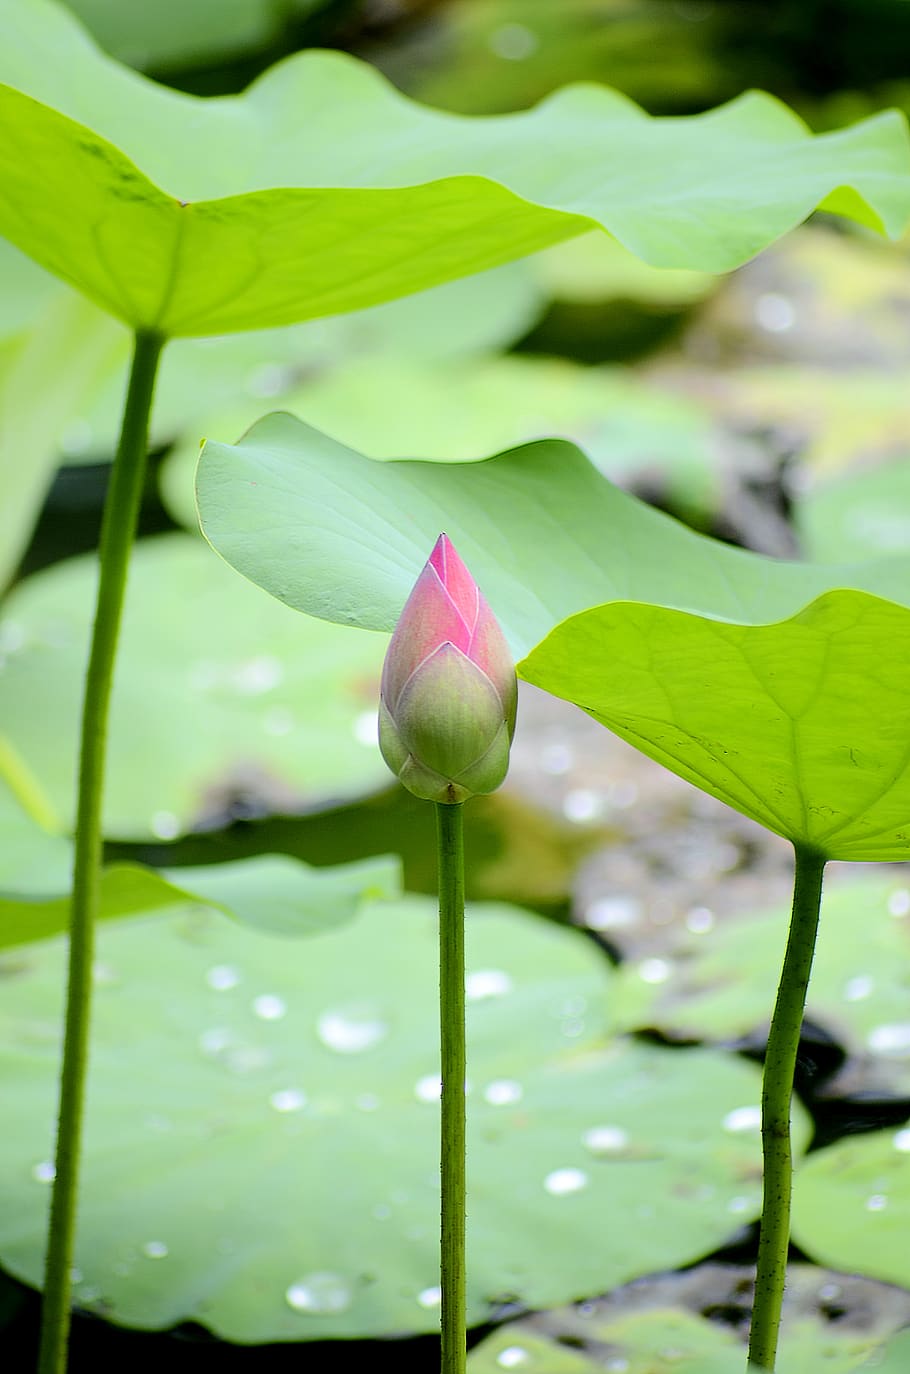 lotus flowers, pink, green, the morning, dew drops, water, flower, large leaf, ponds, life under water